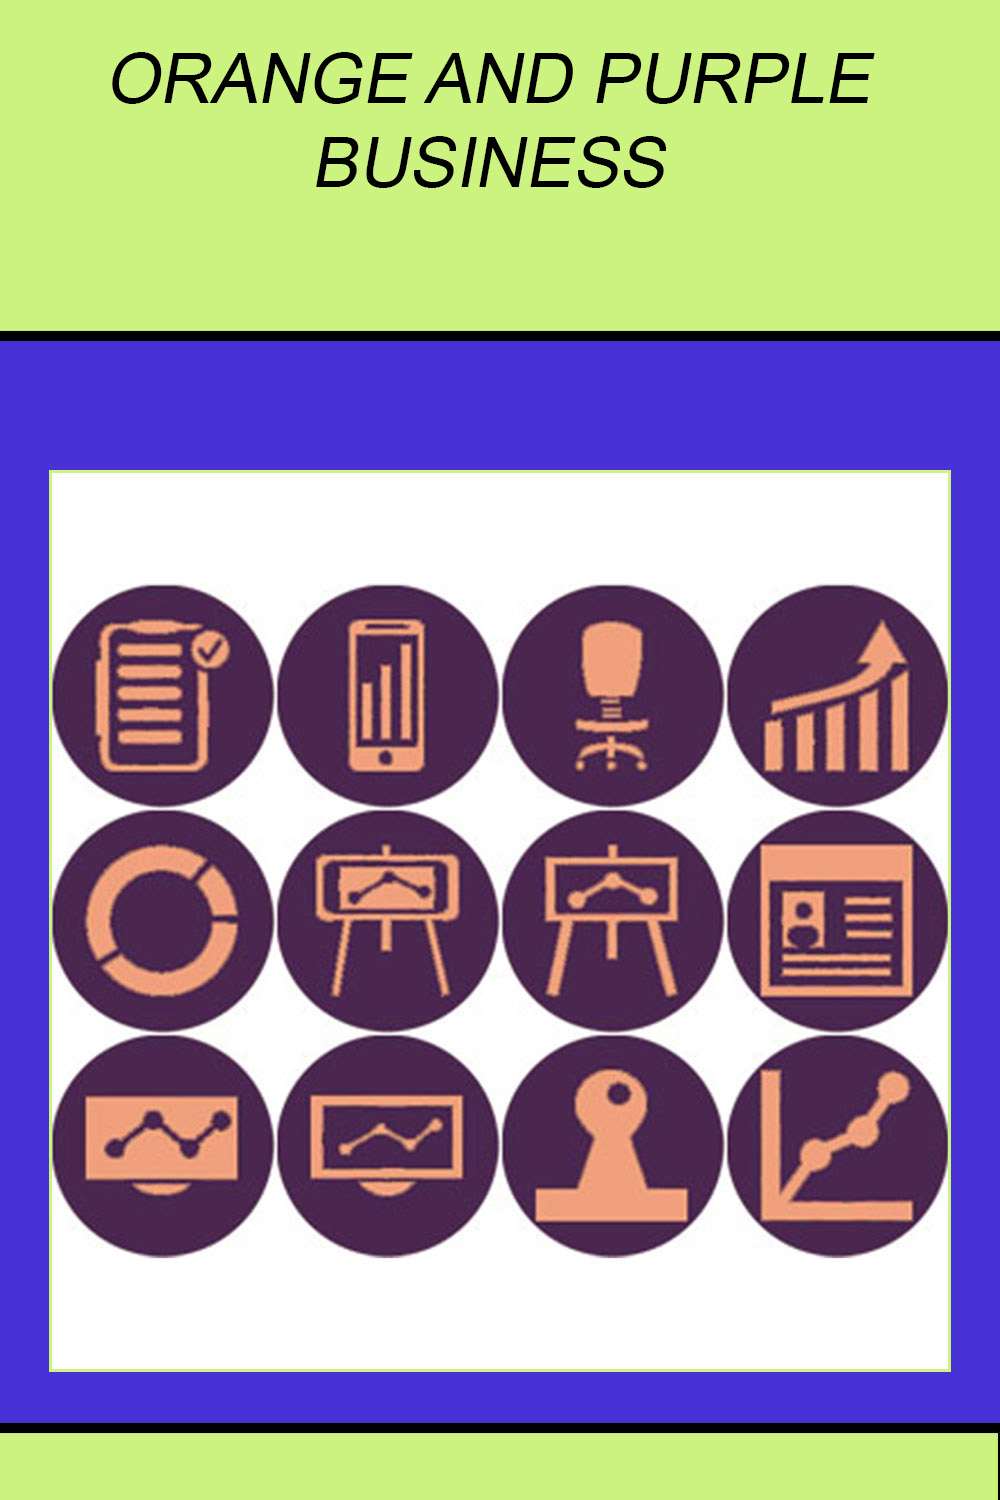 ORANGE AND PURPLE BUSINESS ROUND ICONS pinterest preview image.